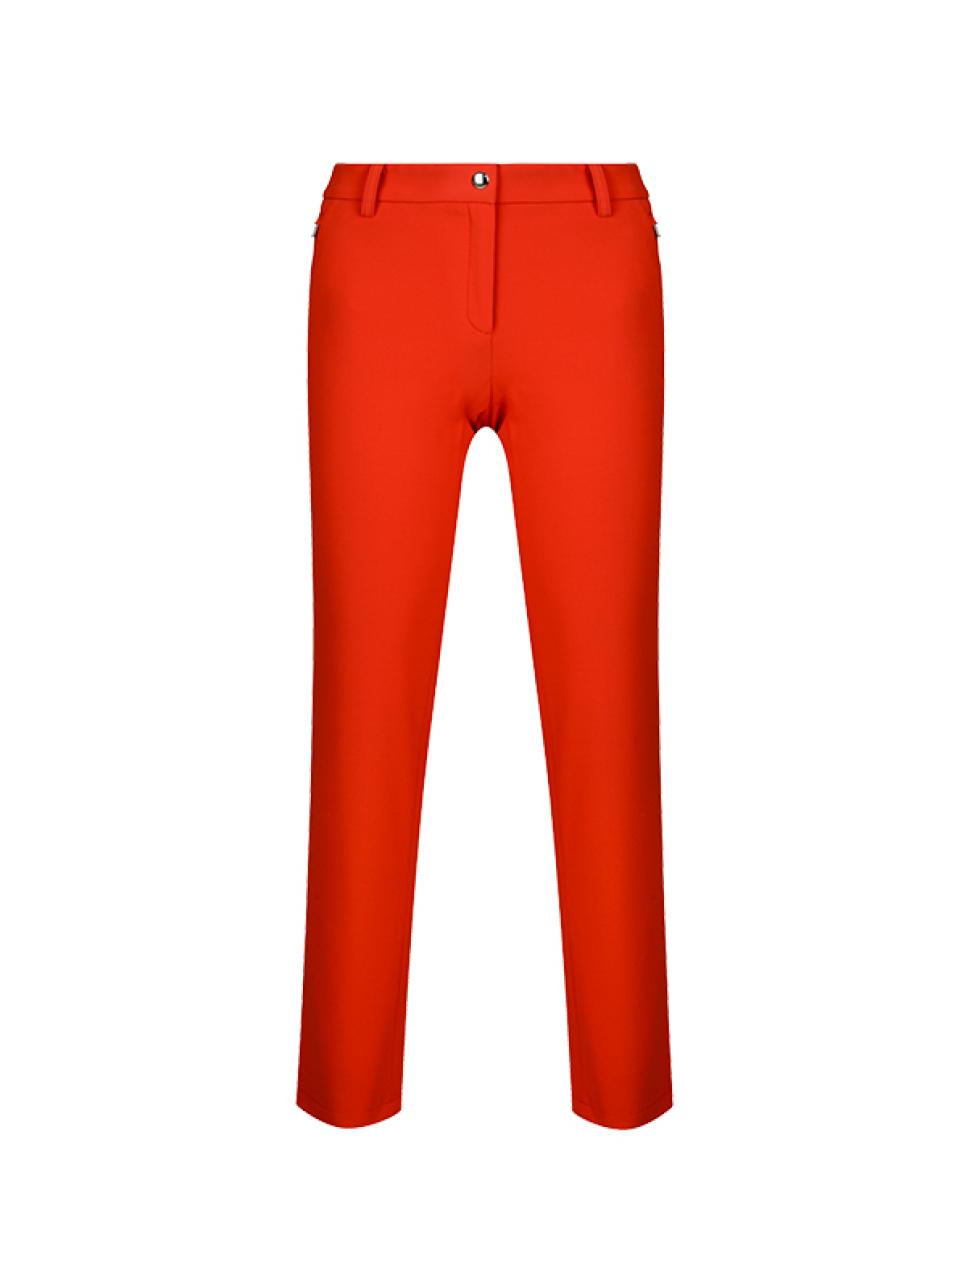 rx-louiscastelwomens-solid-slim-straight-pants.jpeg